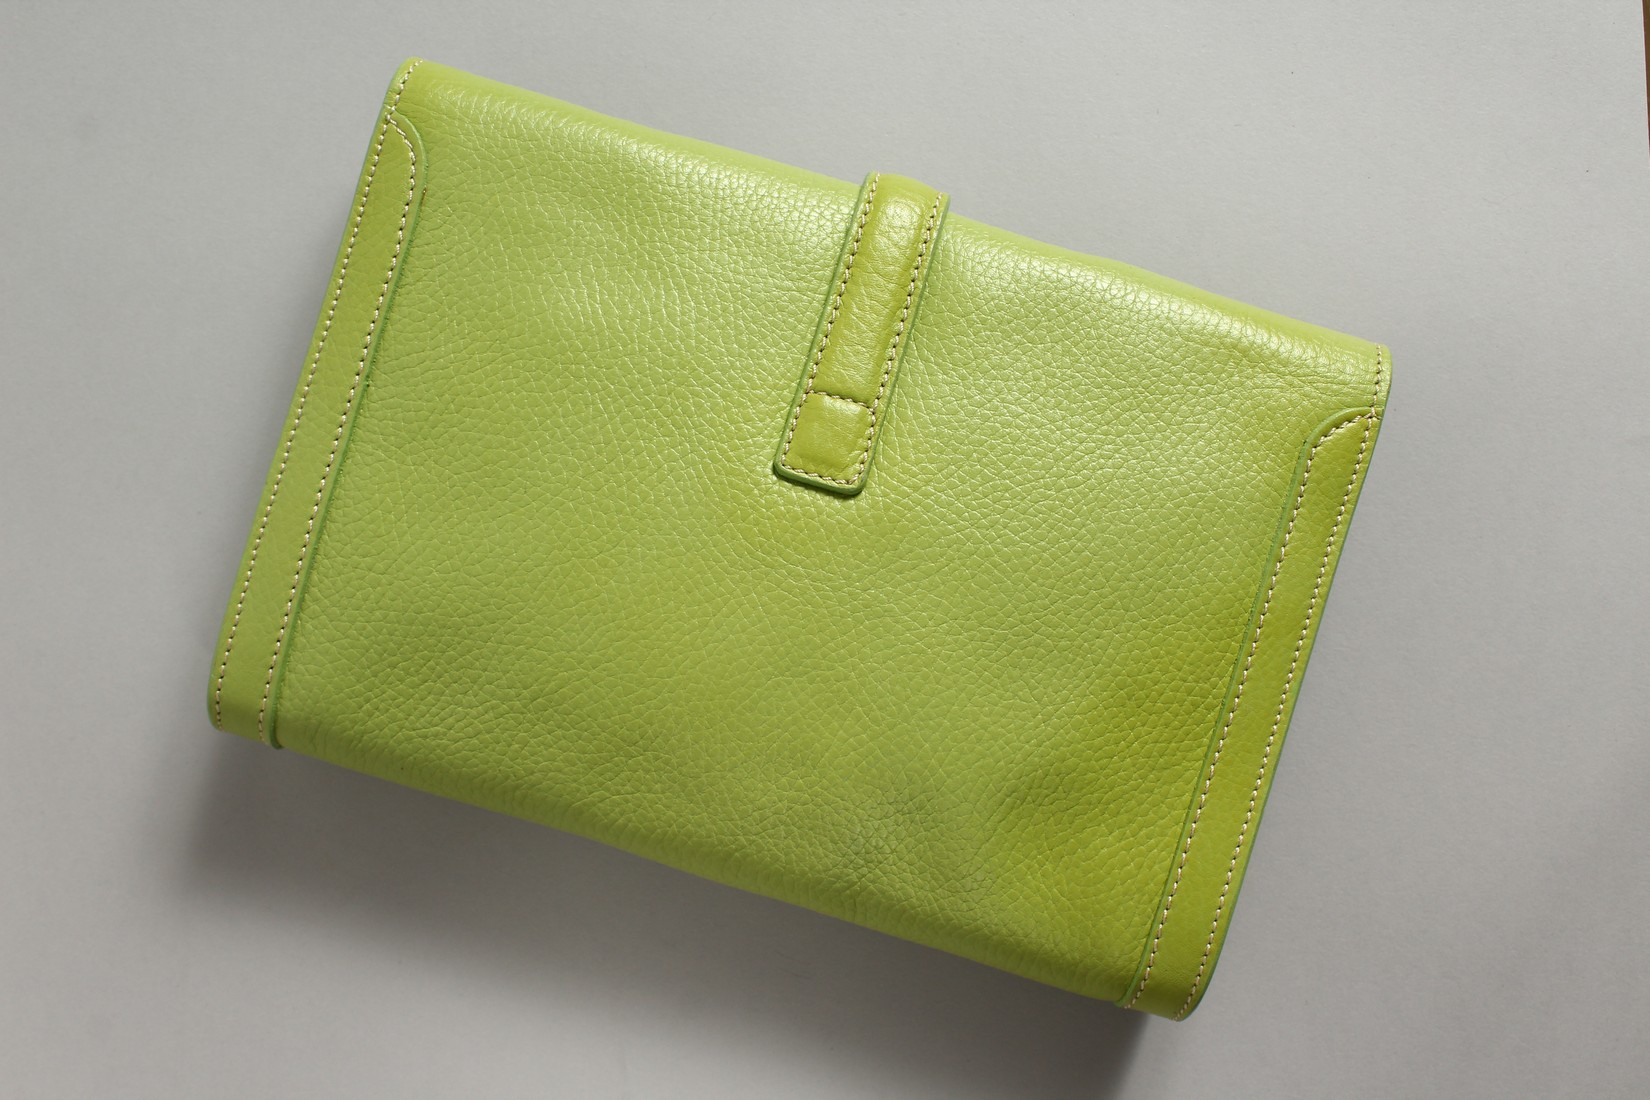 A GREEN LEATHER CLUTCH BAG and strap. 24cm long x 17cm high. - Image 2 of 6